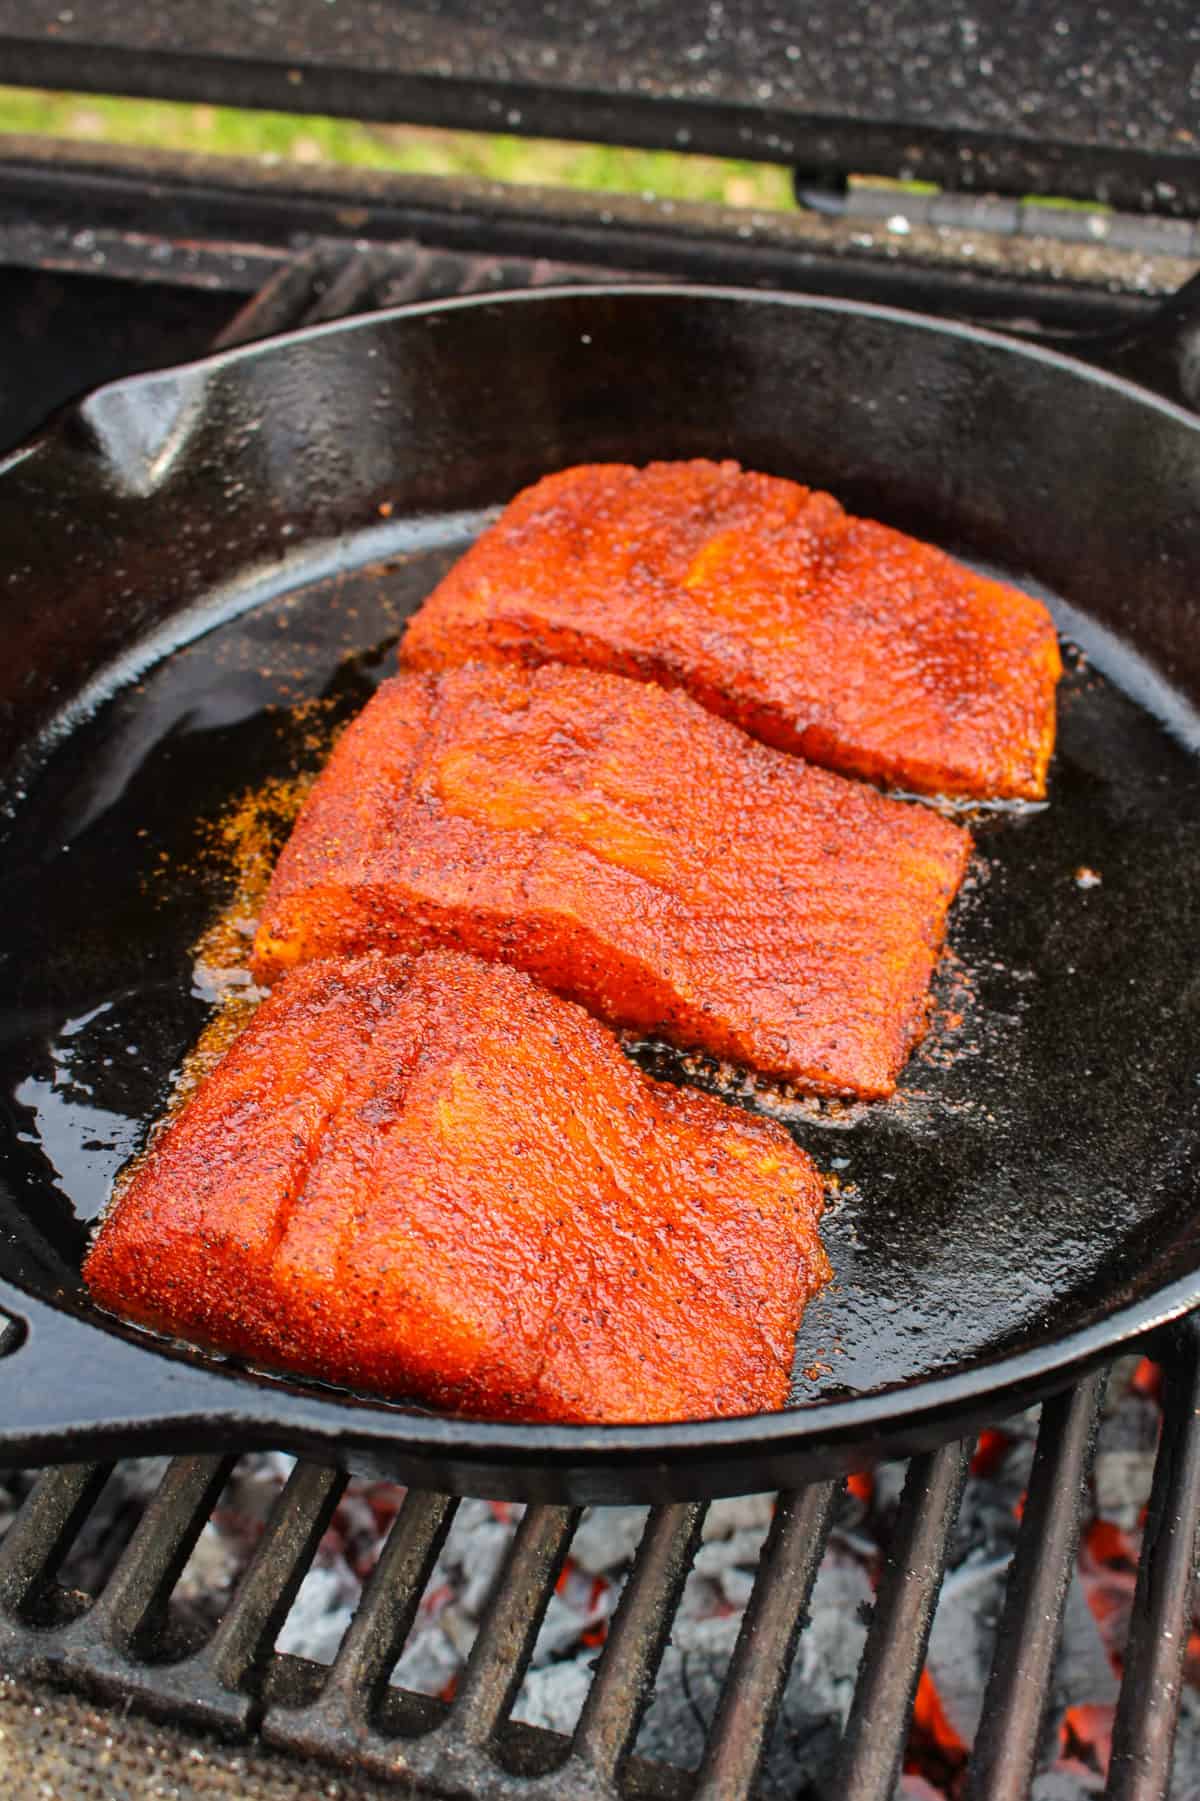 Nashville Hot Cast Iron Salmon in the skillet placed on the grill.